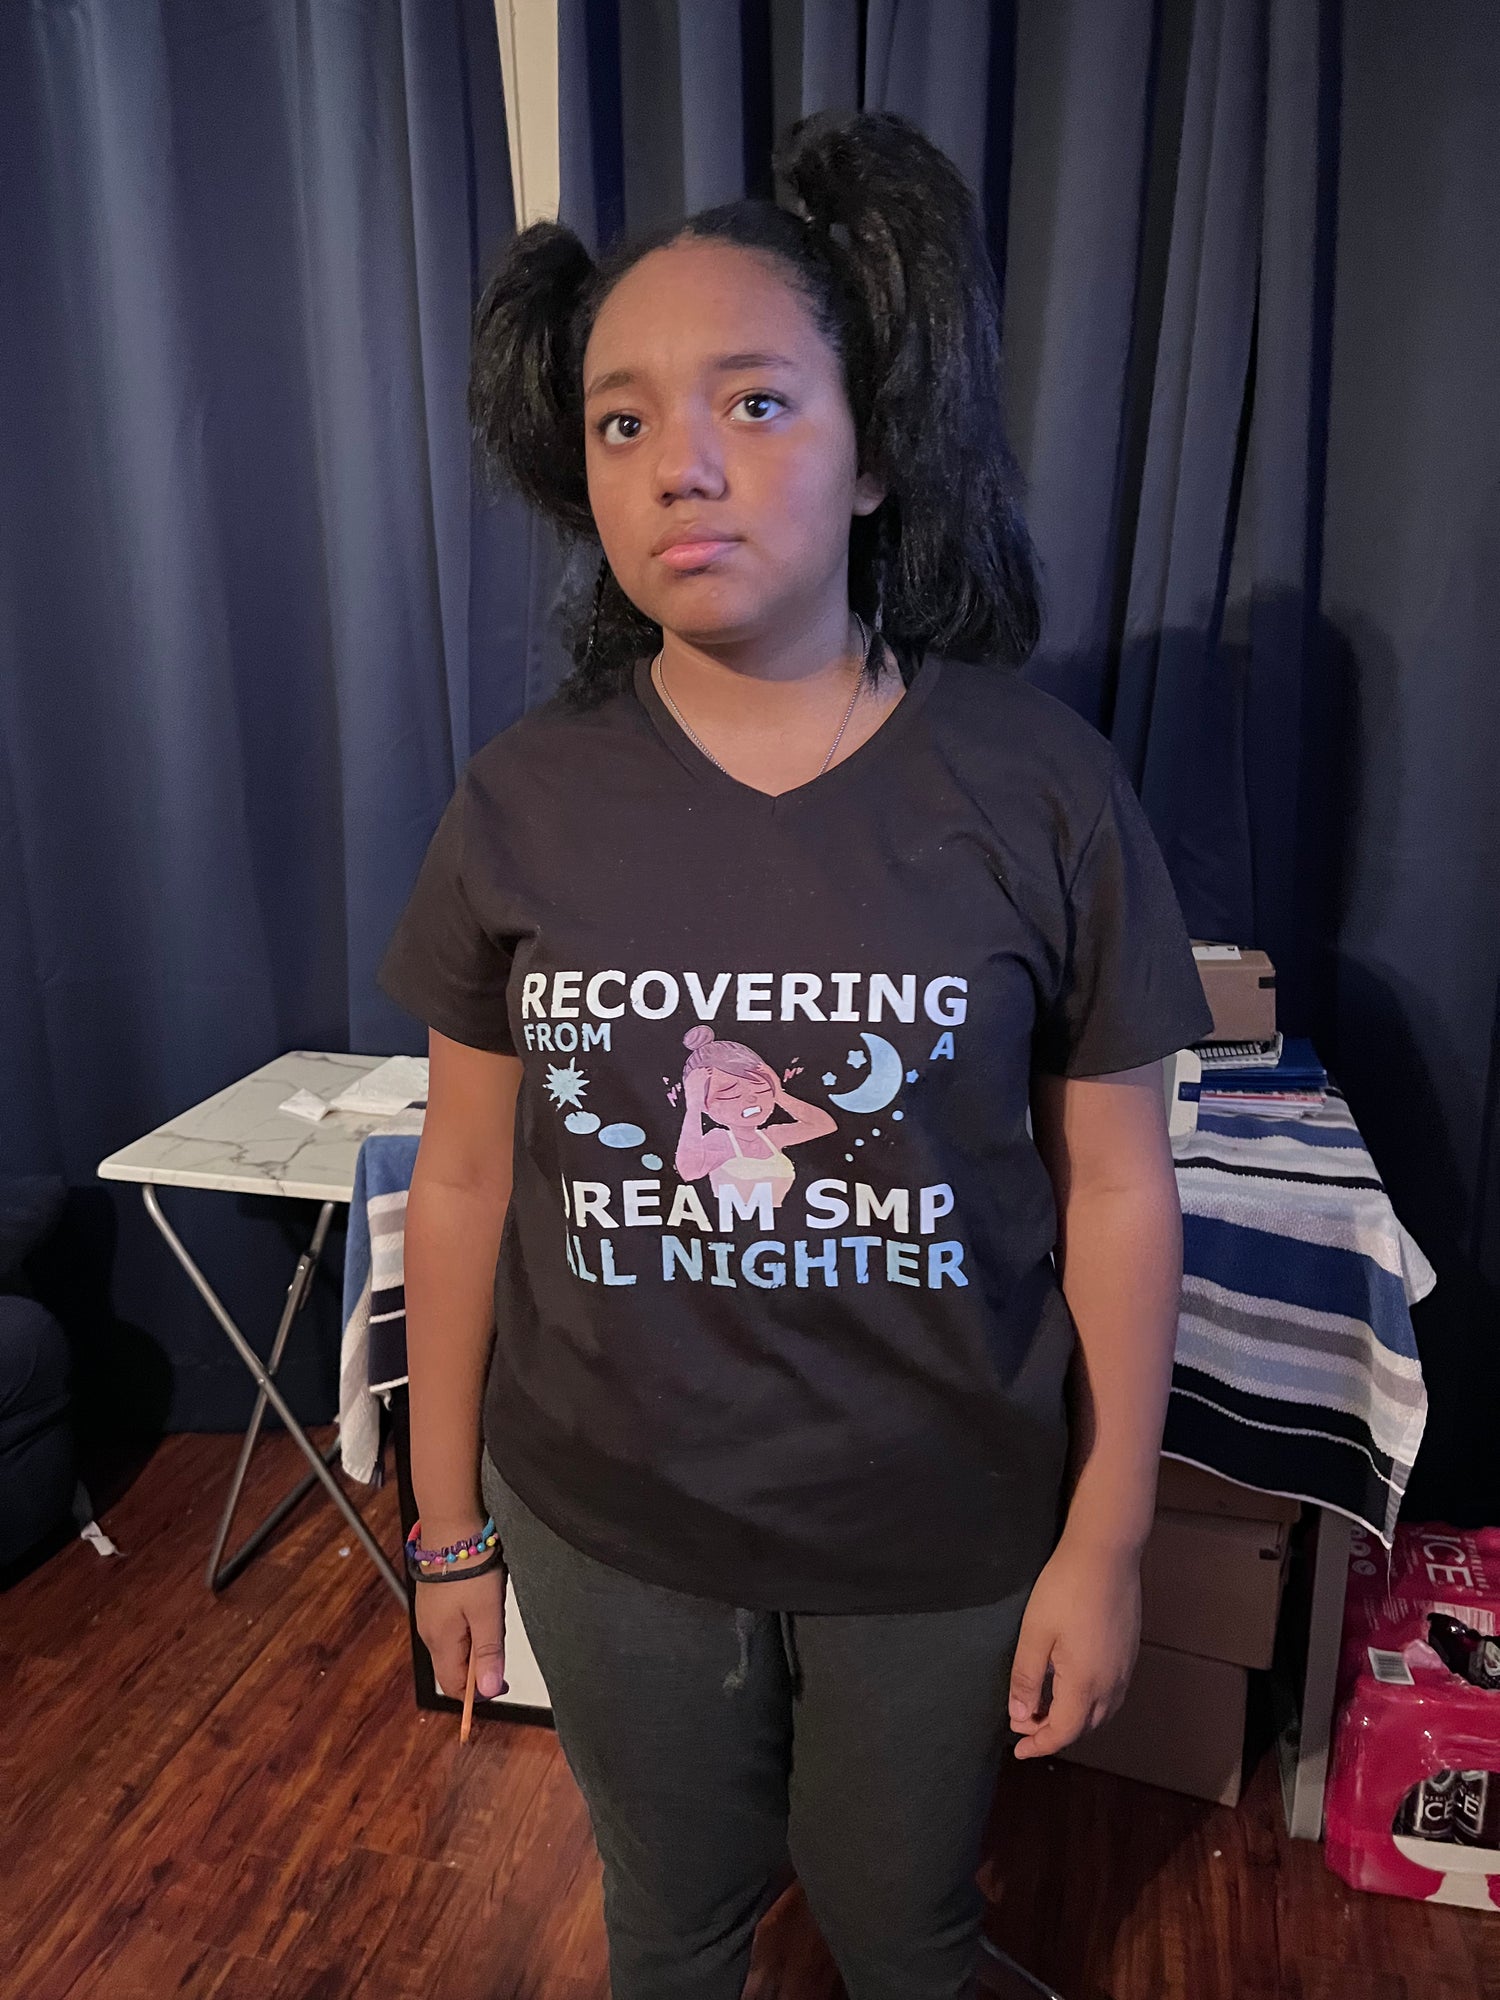 Recovering from a Dream SMP all nighter T-shirt